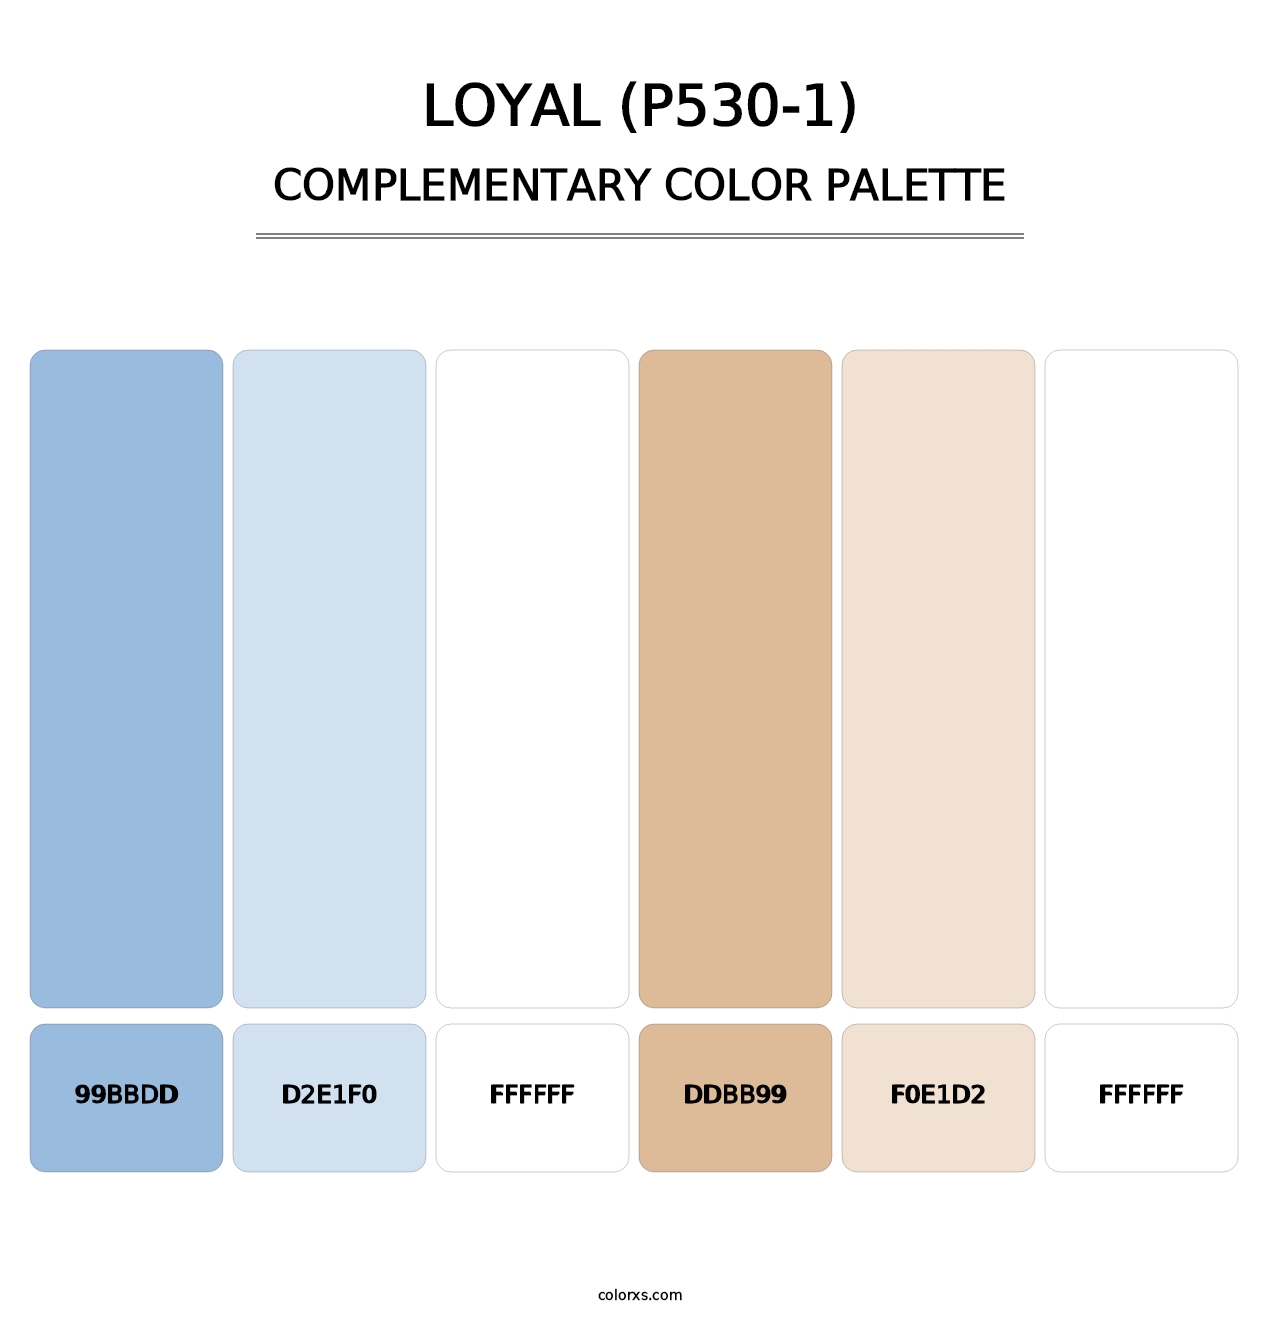 Loyal (P530-1) - Complementary Color Palette